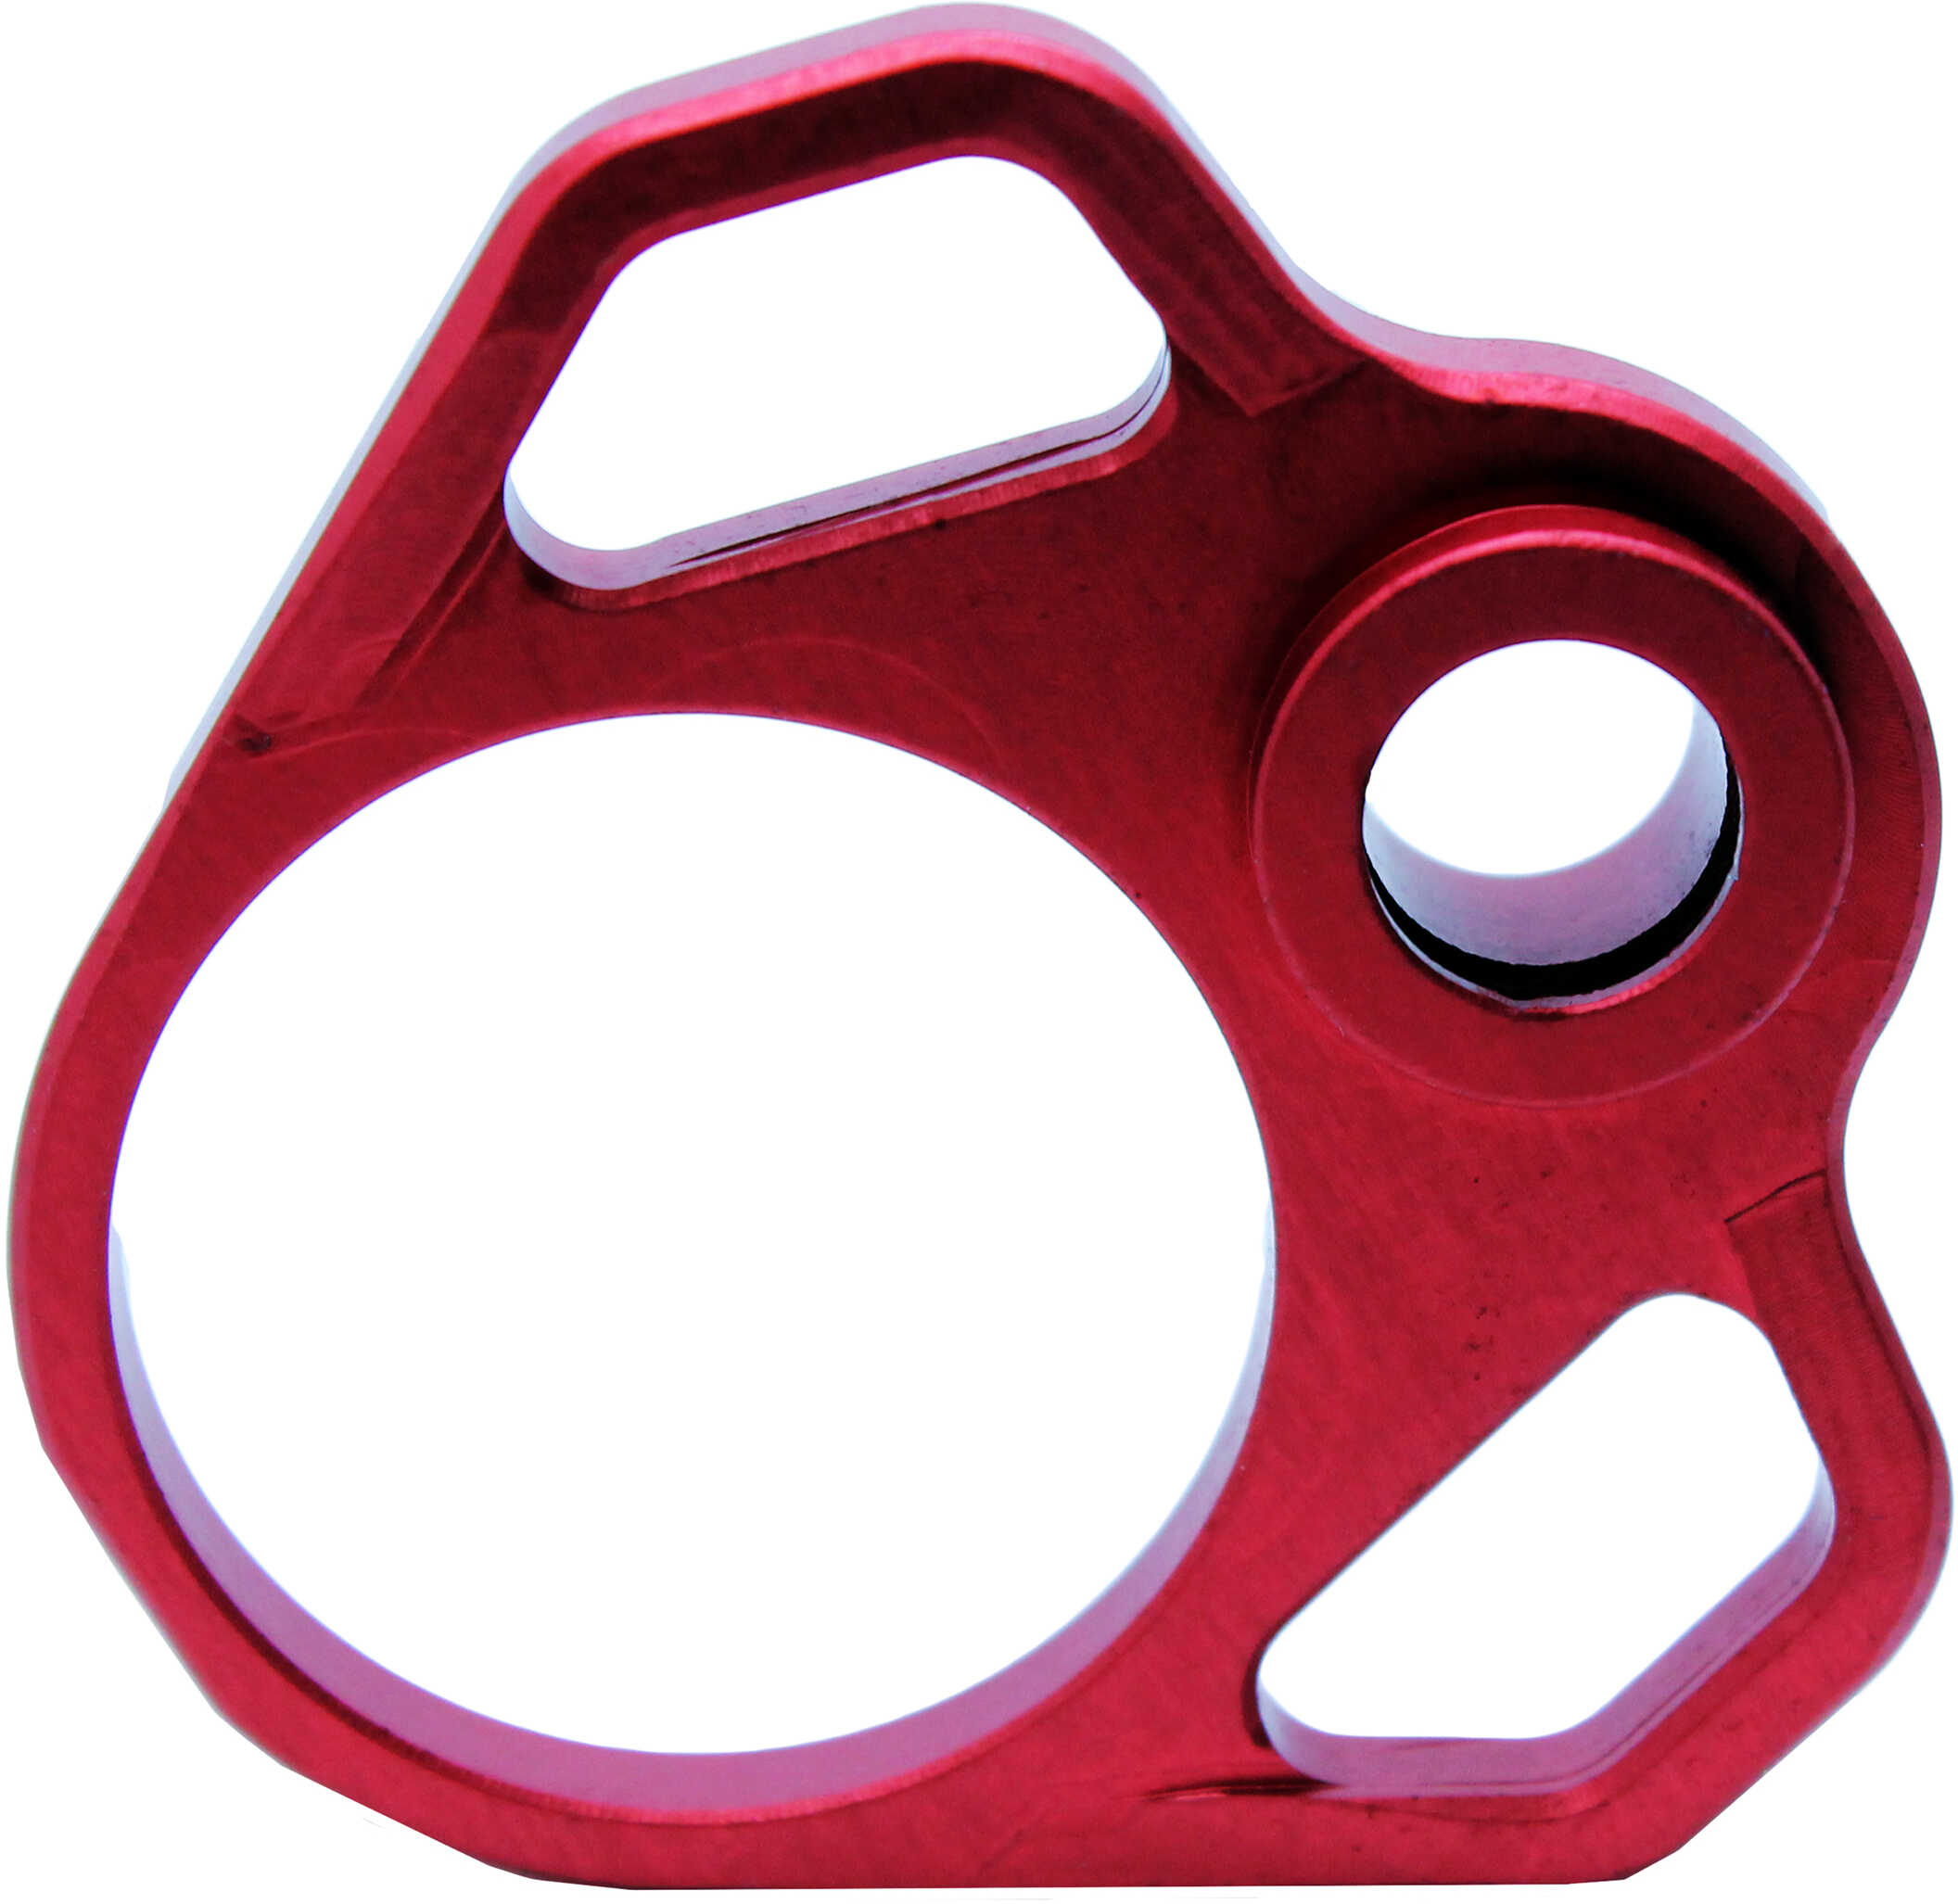 Pistol Buffer Tube Back Plate, Red Md: ACC-PBT-PLATE-RED